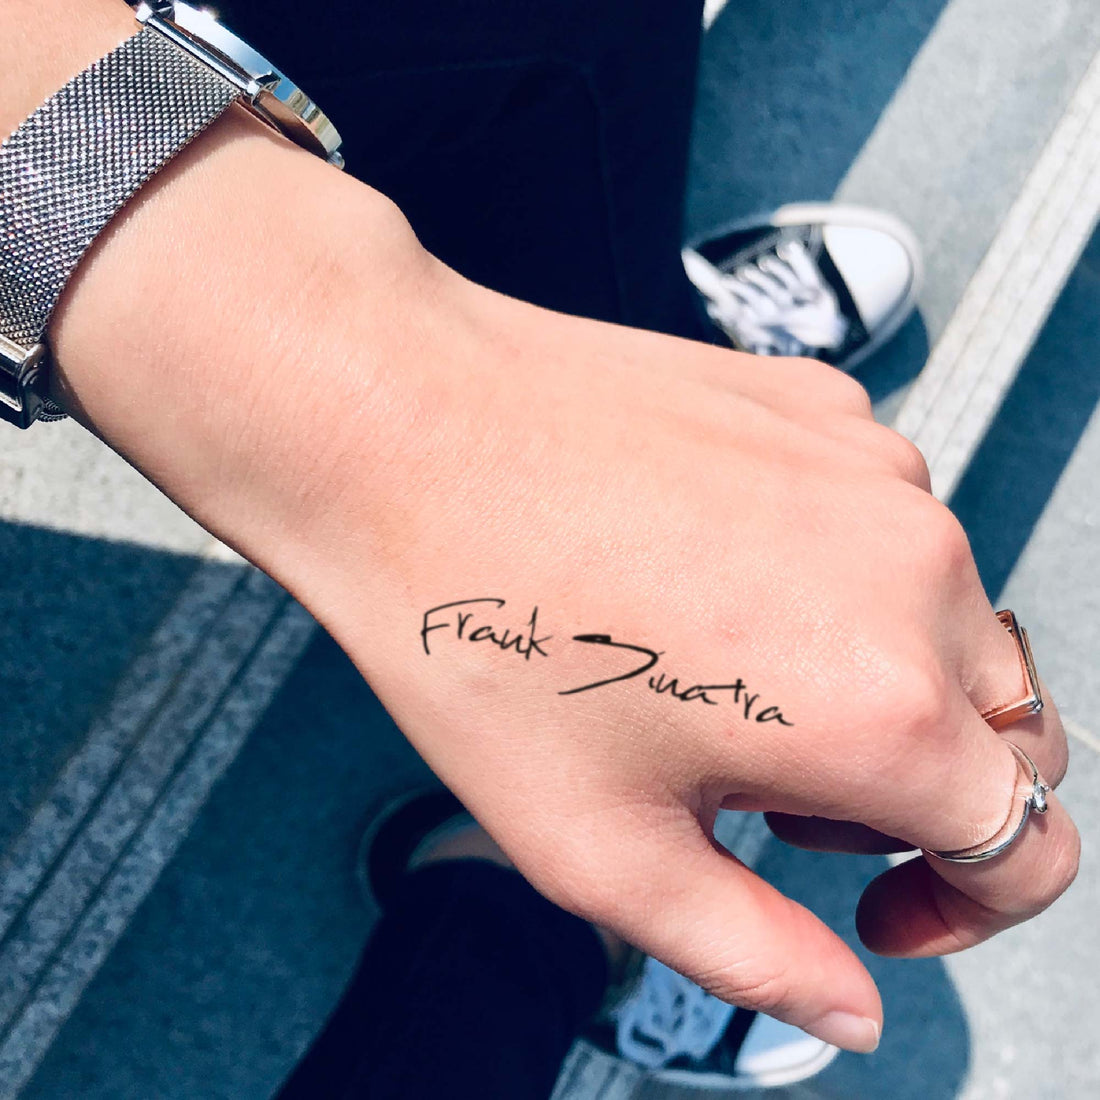 Frank Sinatra custom temporary tattoo sticker design idea inspiration meanings removal arm wrist hand words font name signature calligraphy lyrics tour concert outfits merch accessory gift souvenir costumes wear dress up code